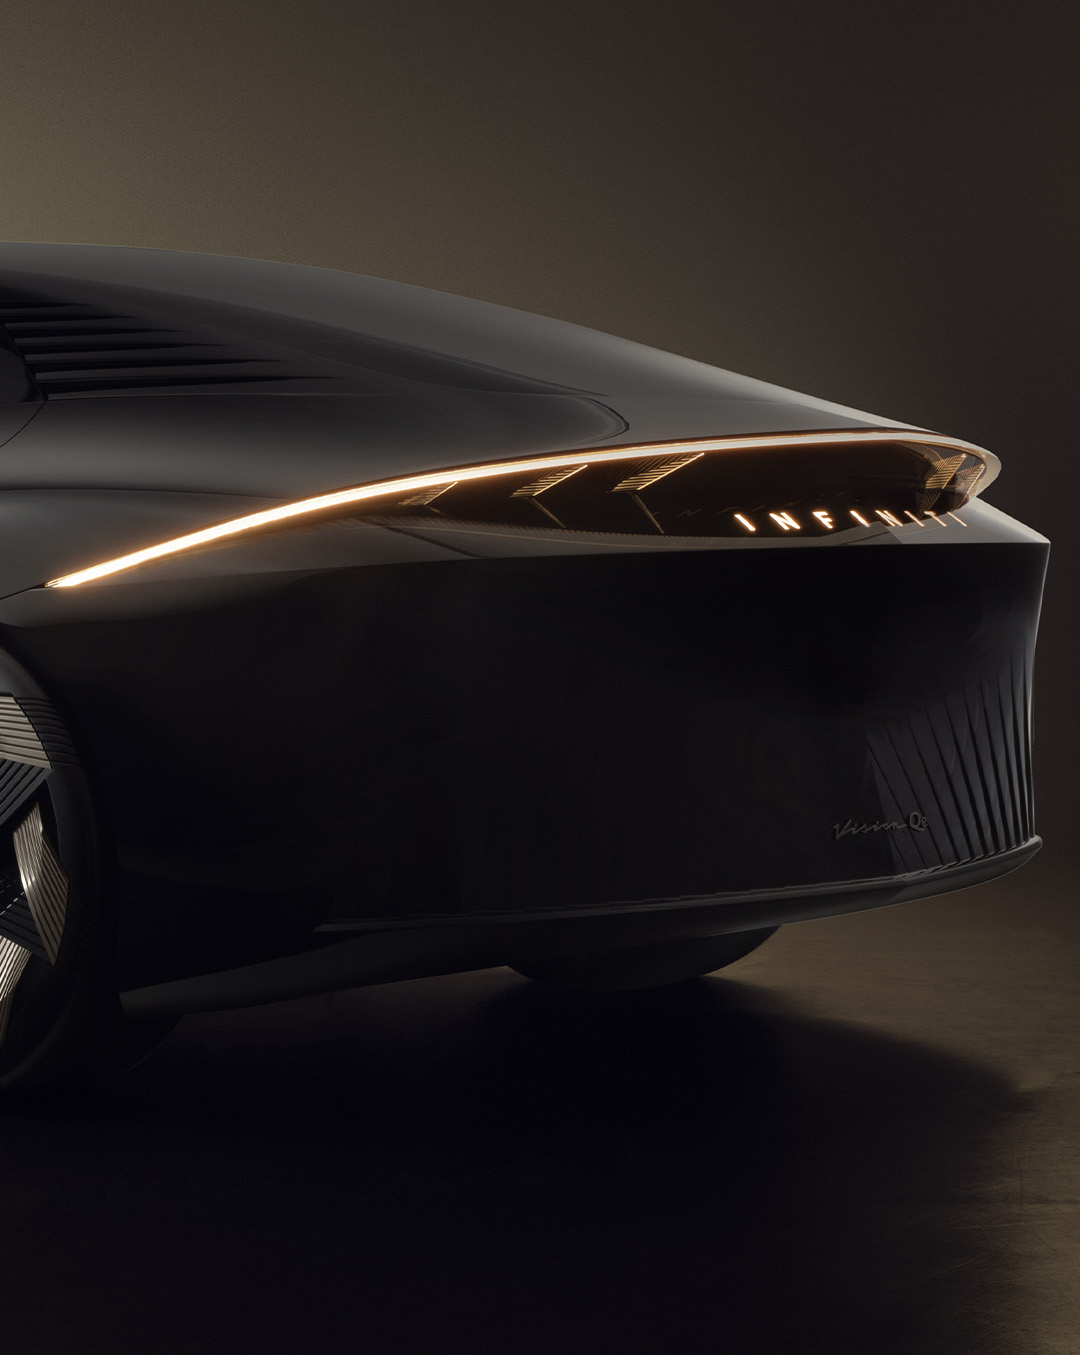 Angled view of the INFINITI Vision Qe electric car’s rear